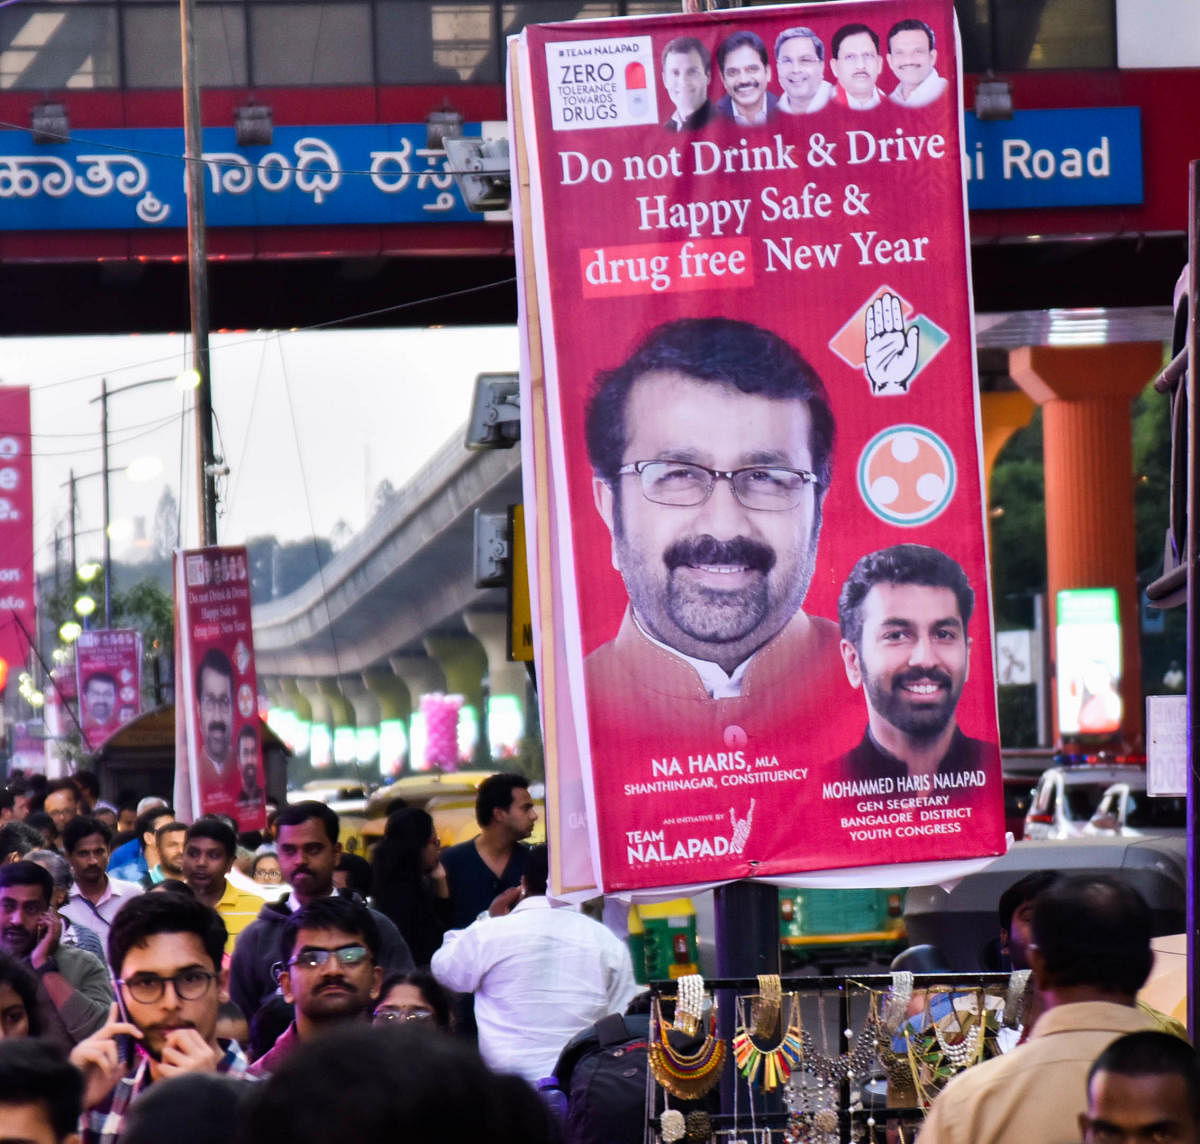 One of the many posters put up on MG Road by Shanthinagar MLA, N A Haris. DH PHOTO